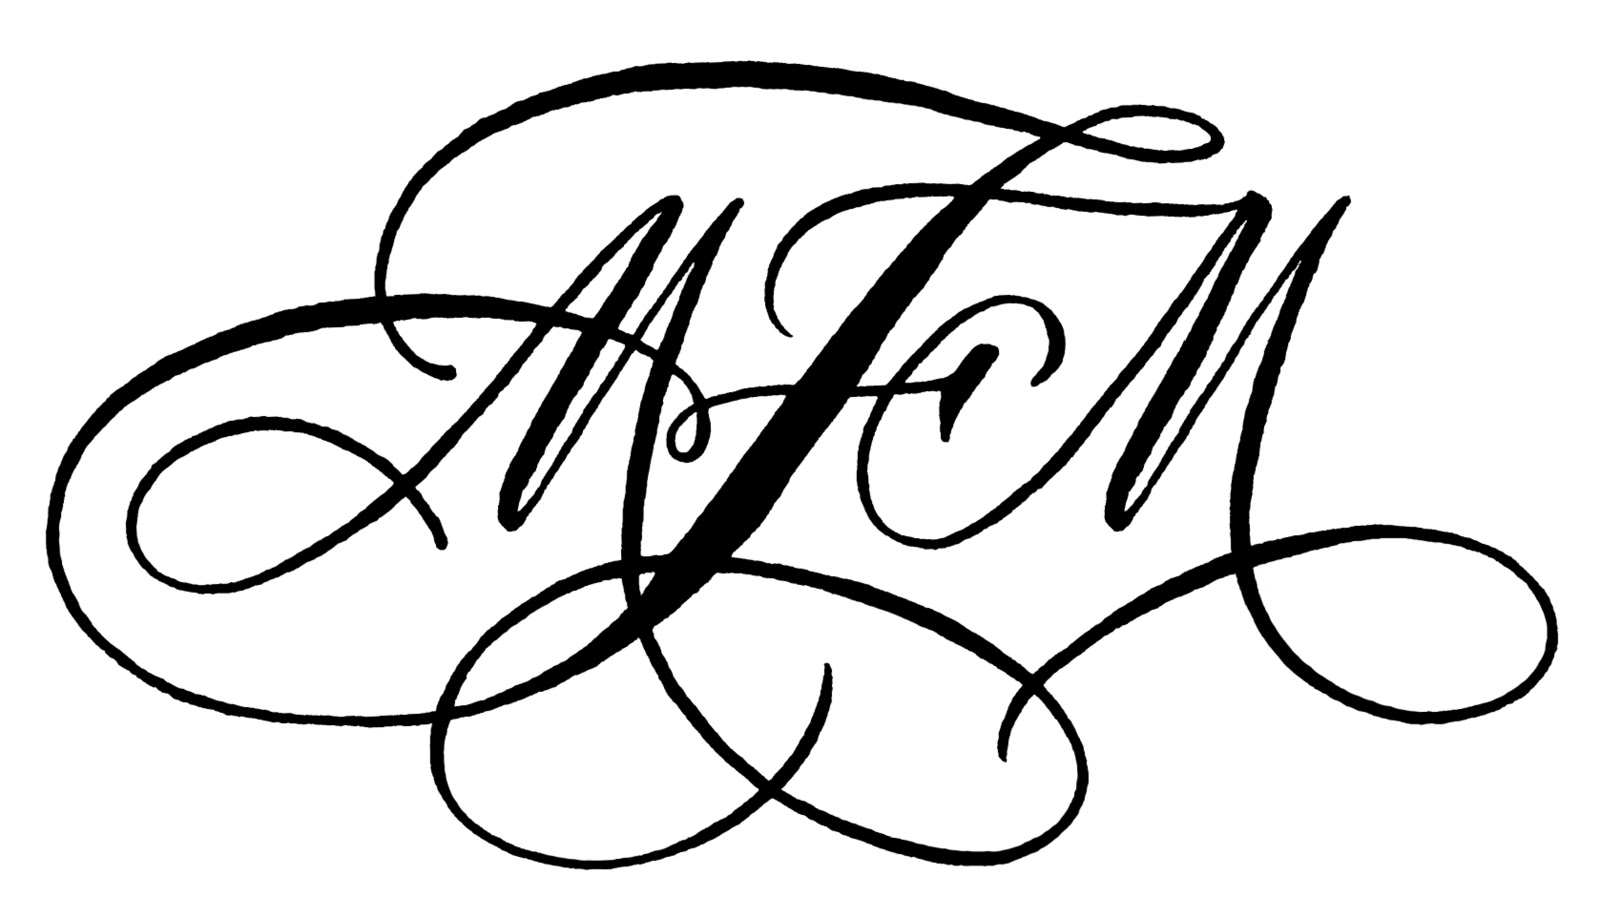 A to Z Calligraphy: Monograms